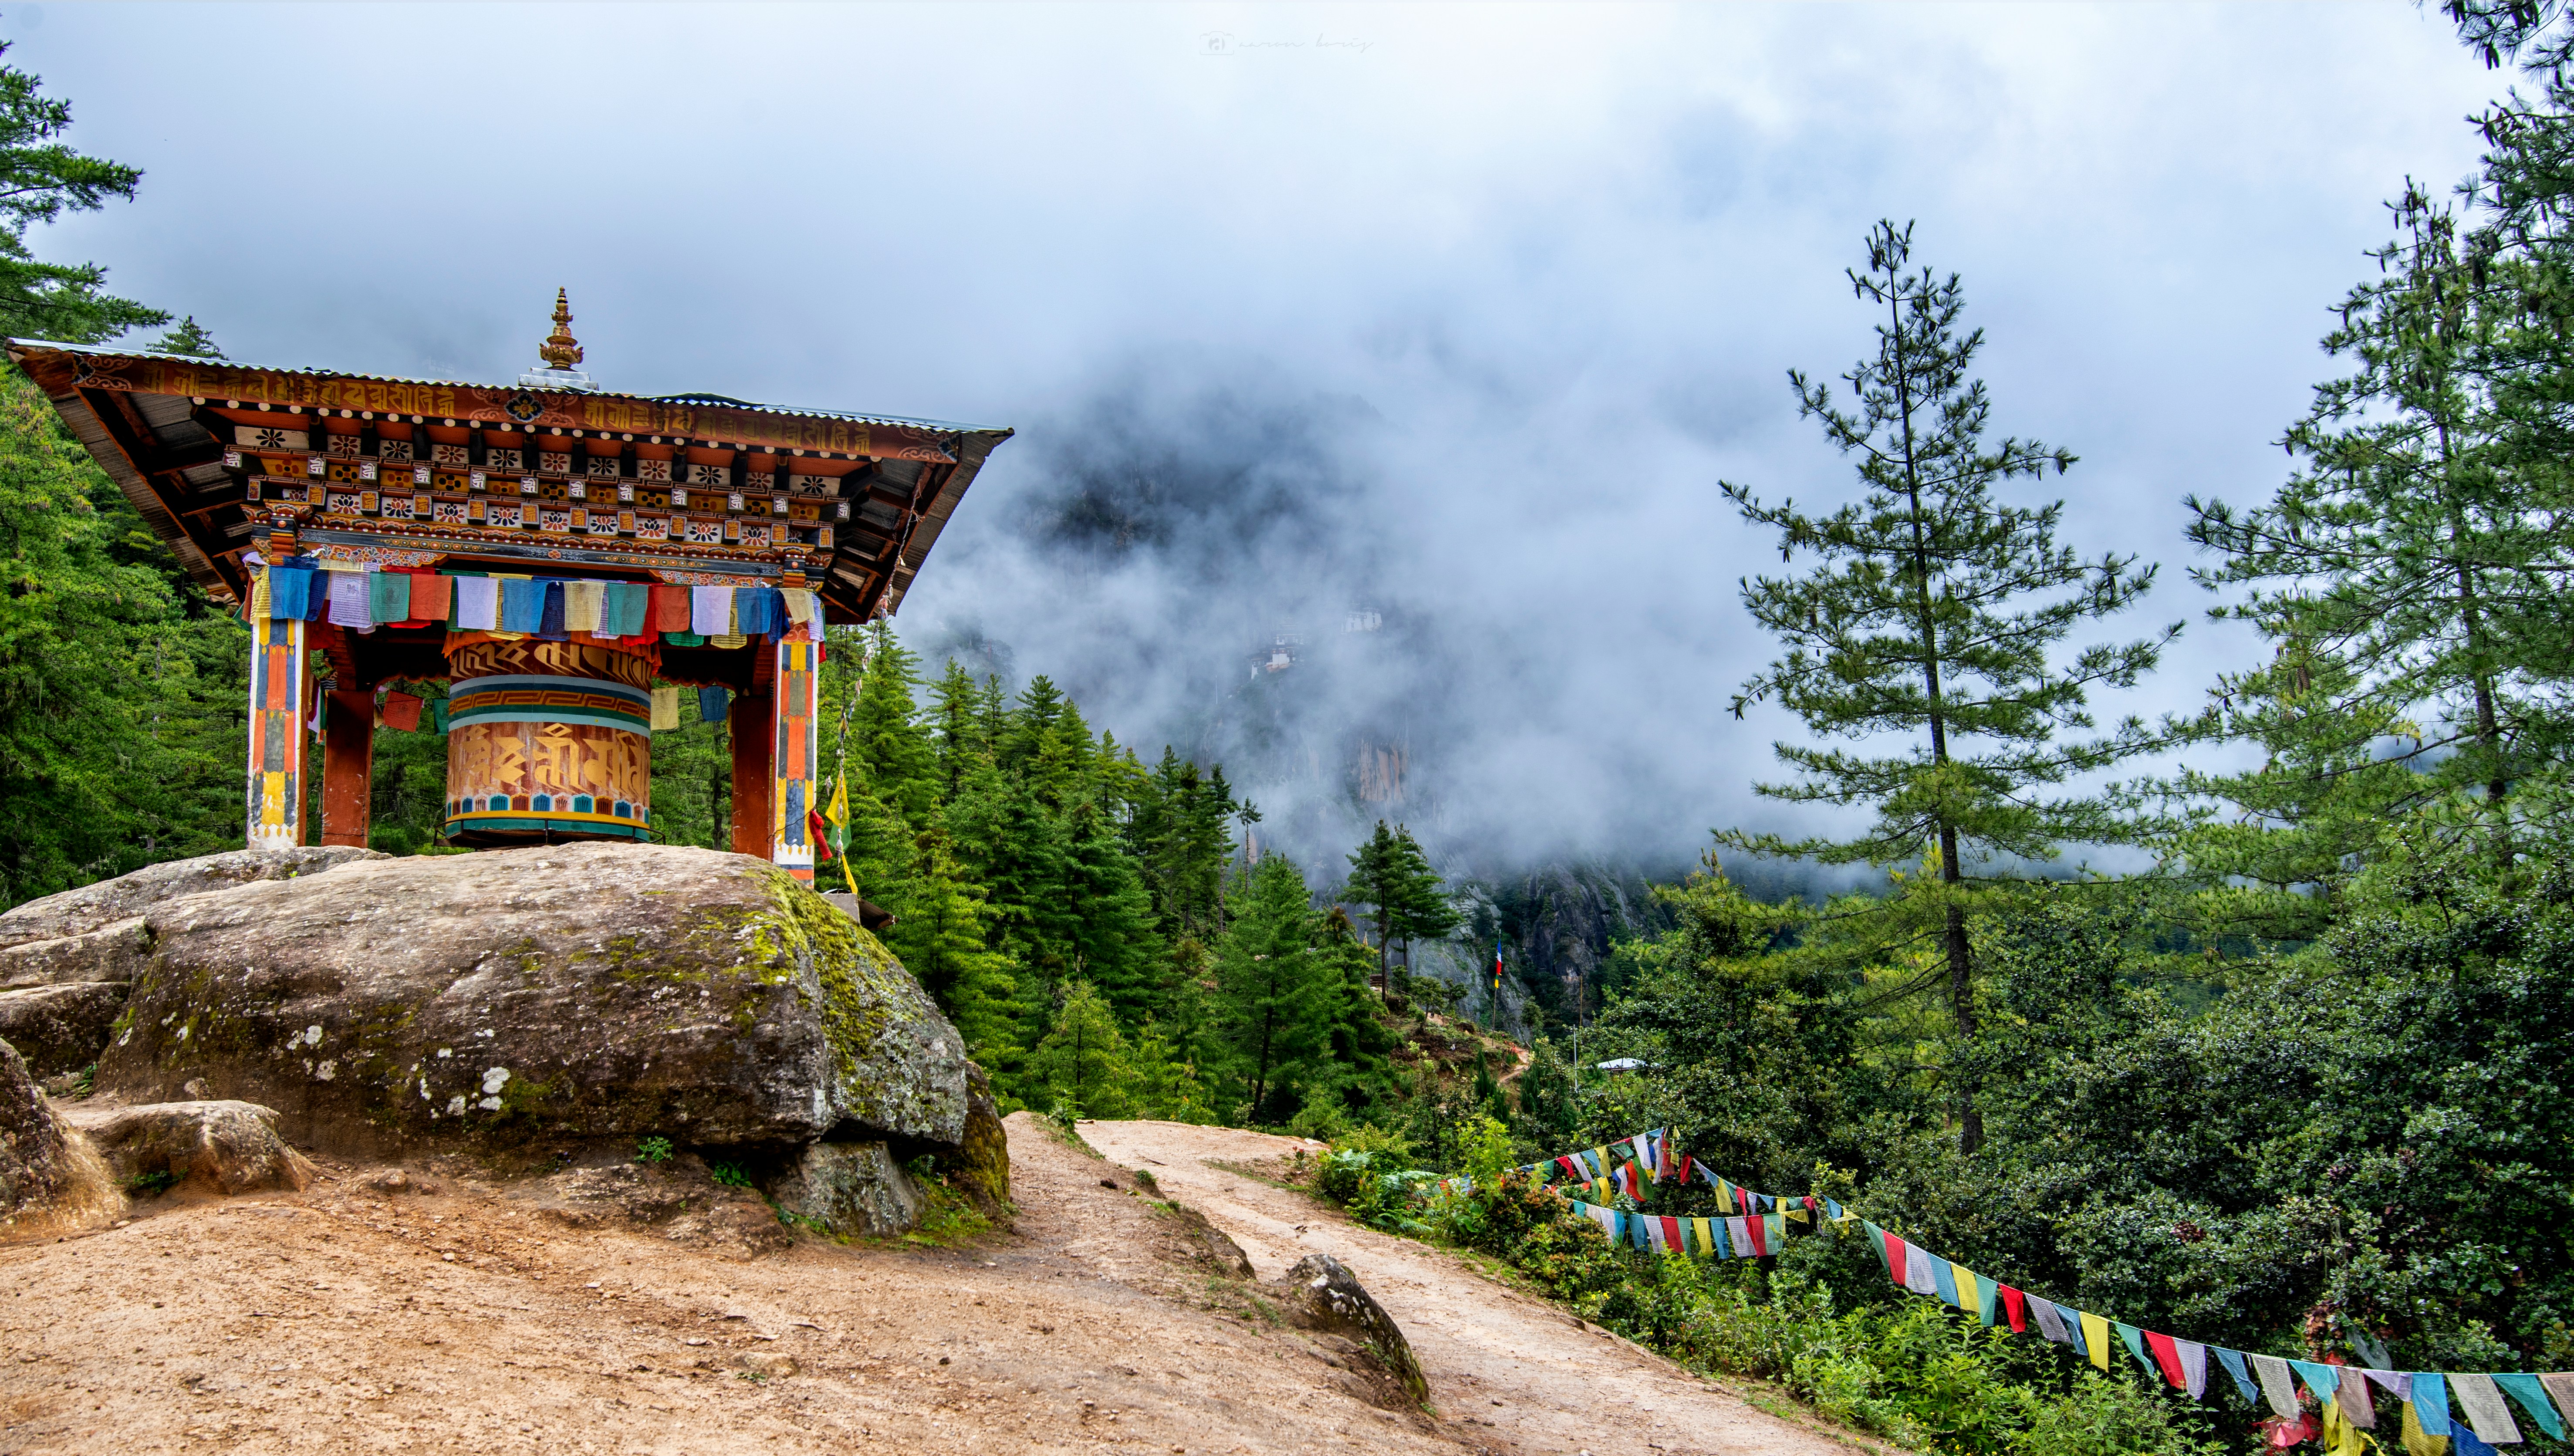 Bhutan - home of the GNH